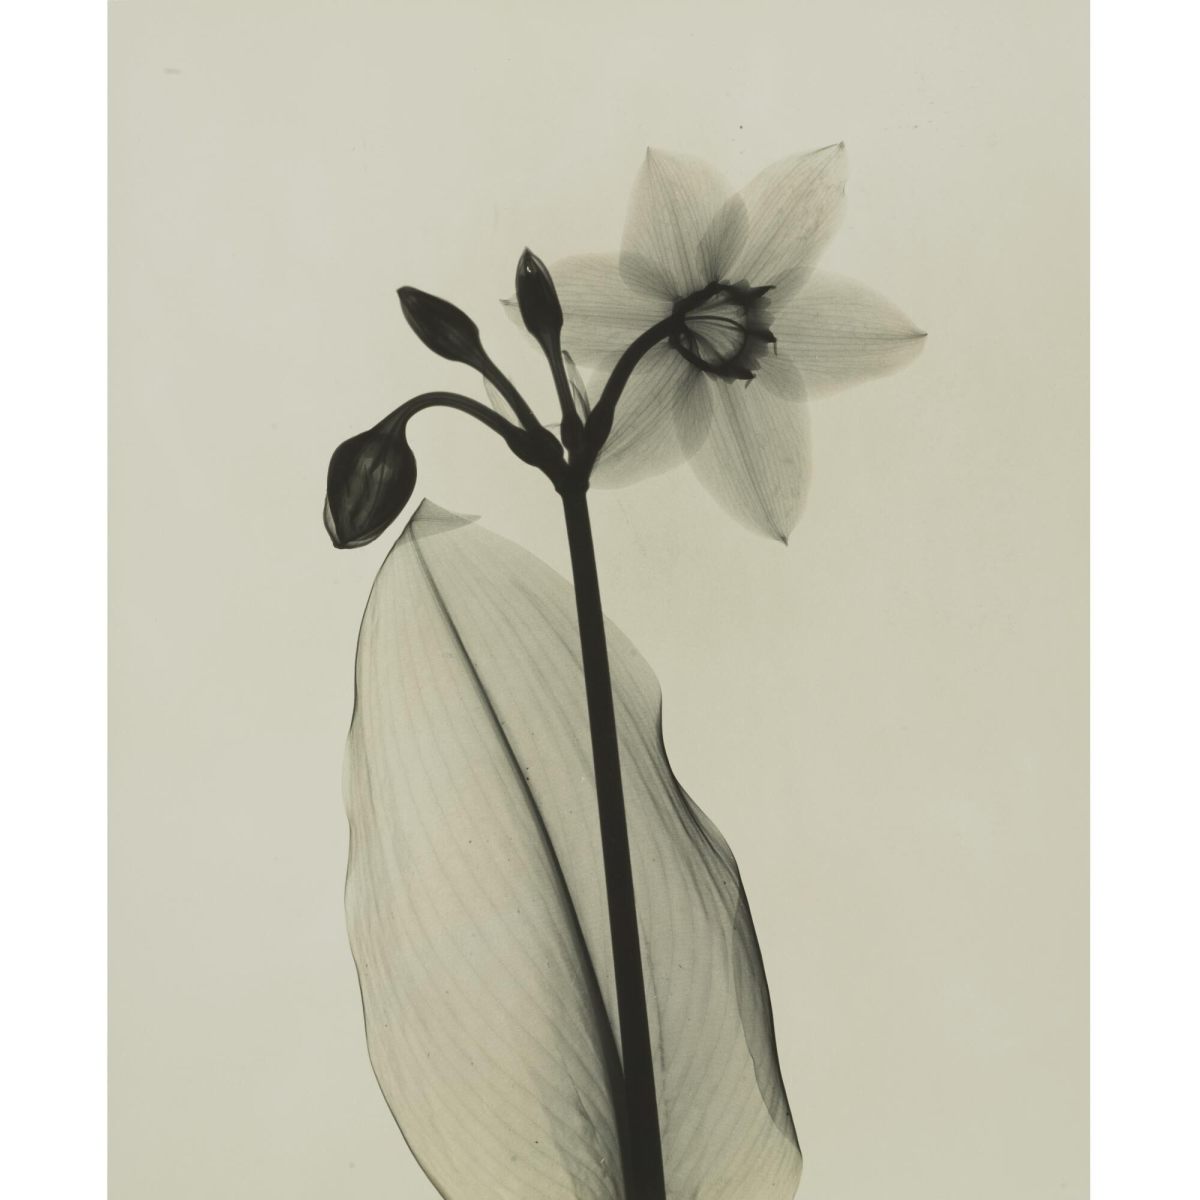 X-rays Capture Inner Beauty of Flowers - Antique